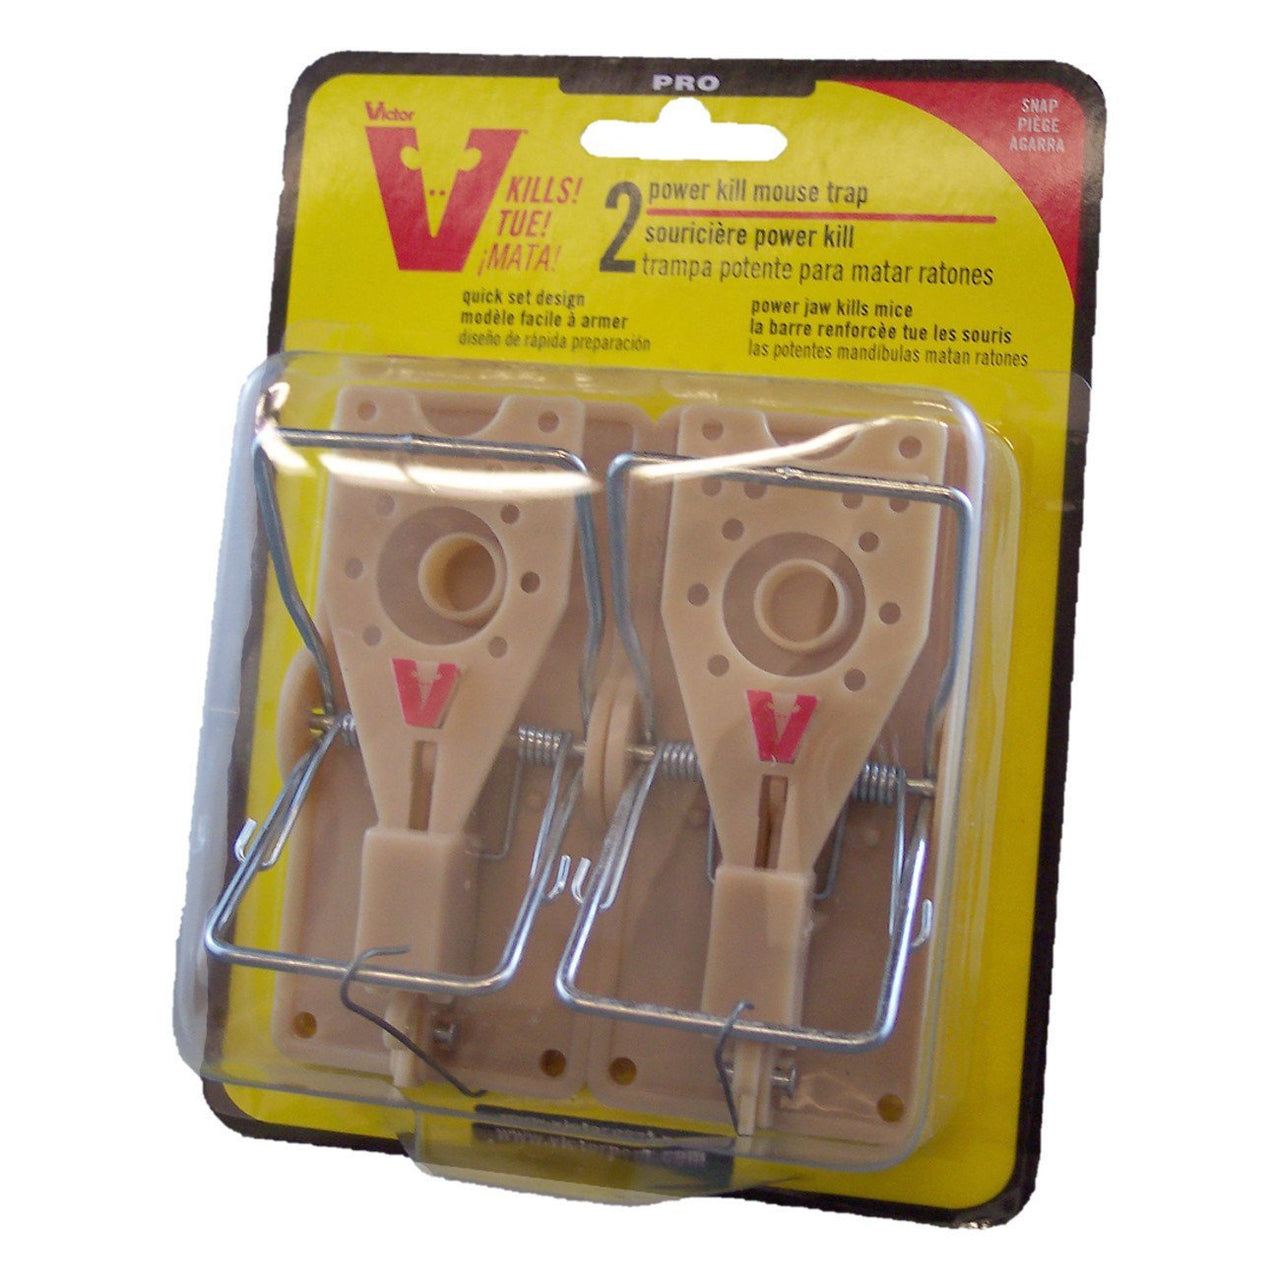 Remedy Animal Health Store - Victor power kill mouse trap (2 pack